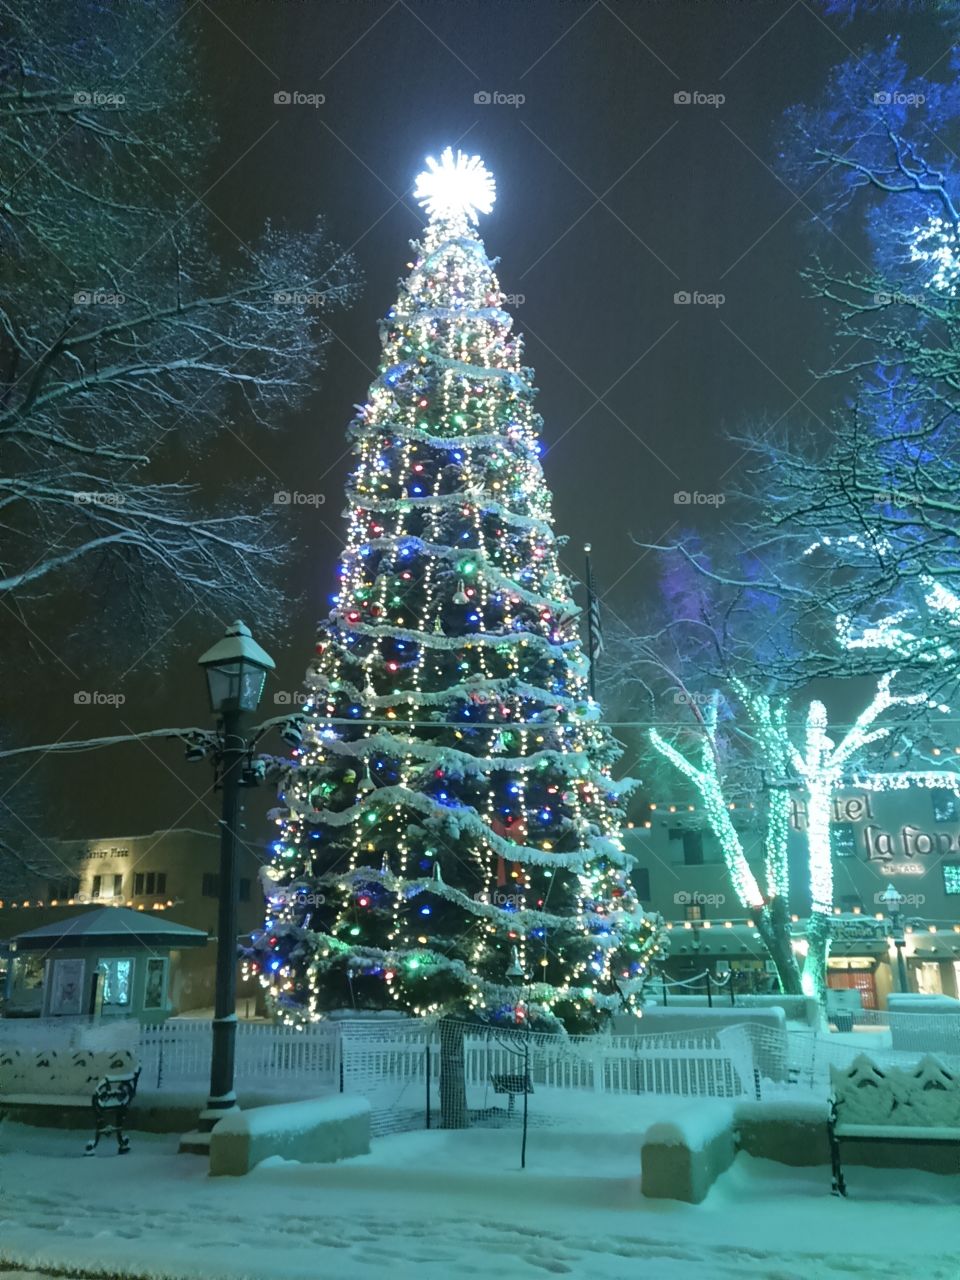 Decorated outdoor holiday pine tree twinkling on snowy night in Plaza